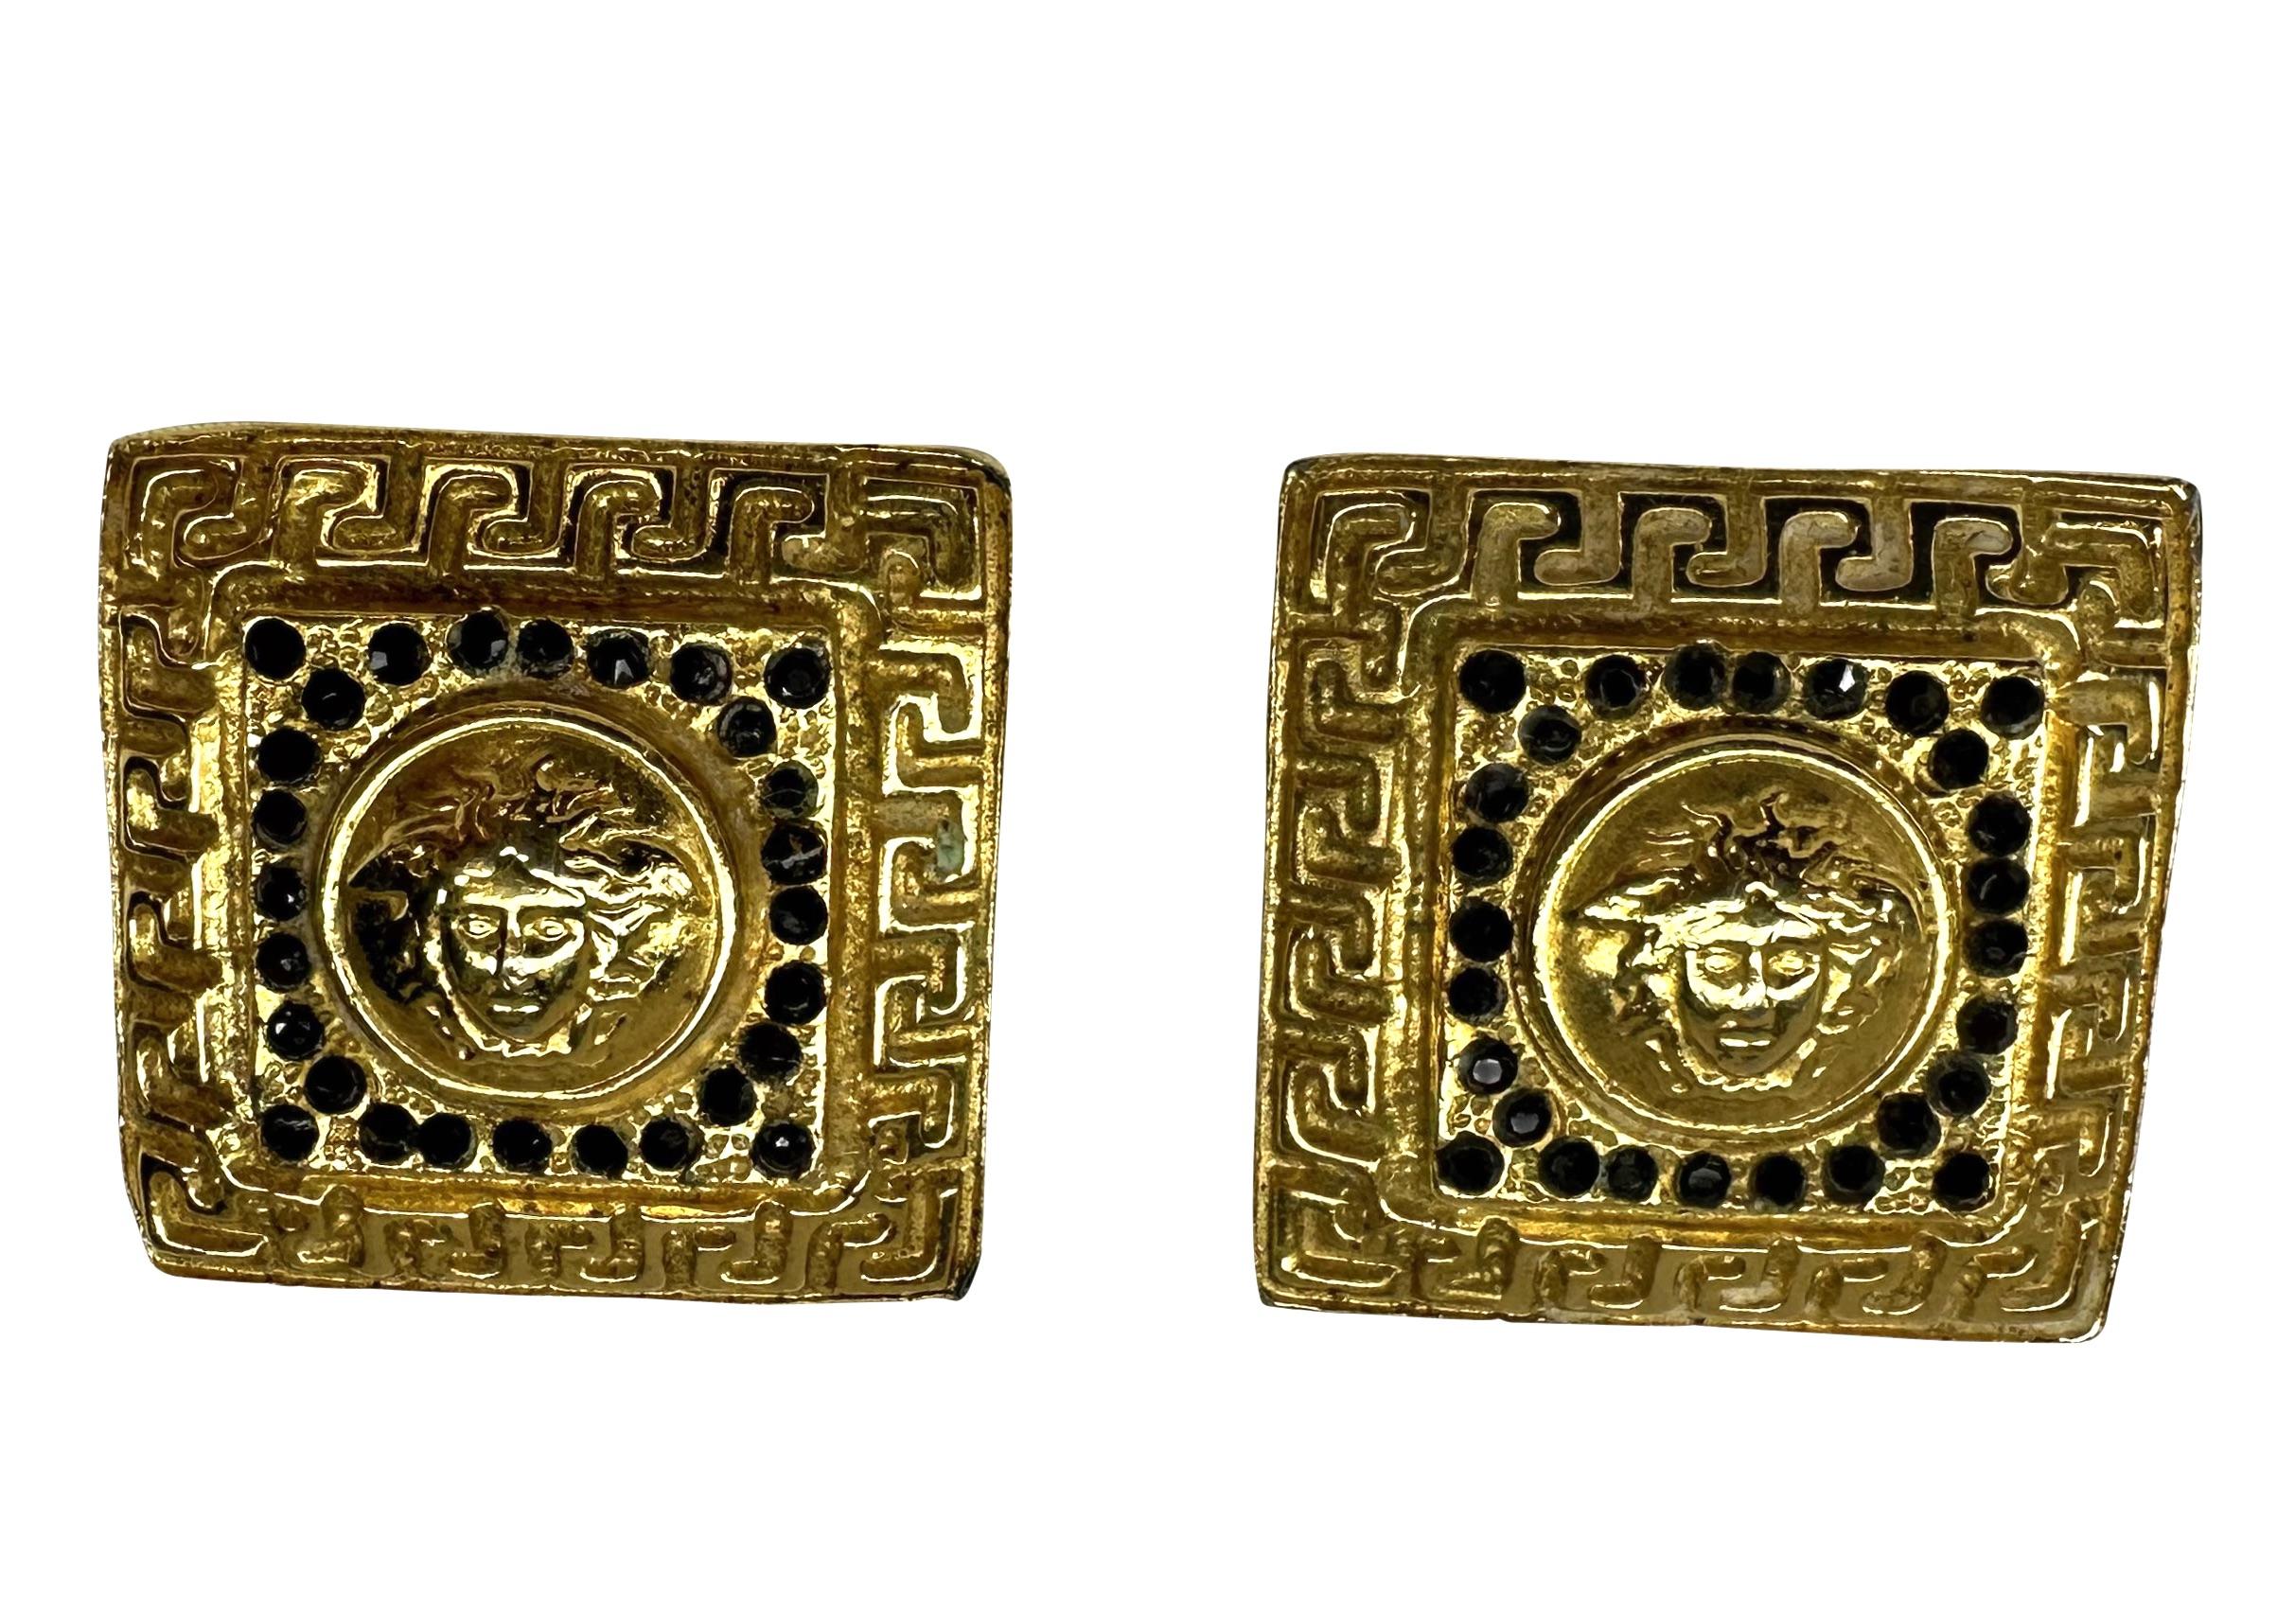 Presenting a pair of large gold-tone Gianni Versace Medusa clip-on earrings, designed by Gianni Versace. From the 1990s, these fabulous large square earrings feature a Greek key border and are made complete with a large Versace Medusa logo